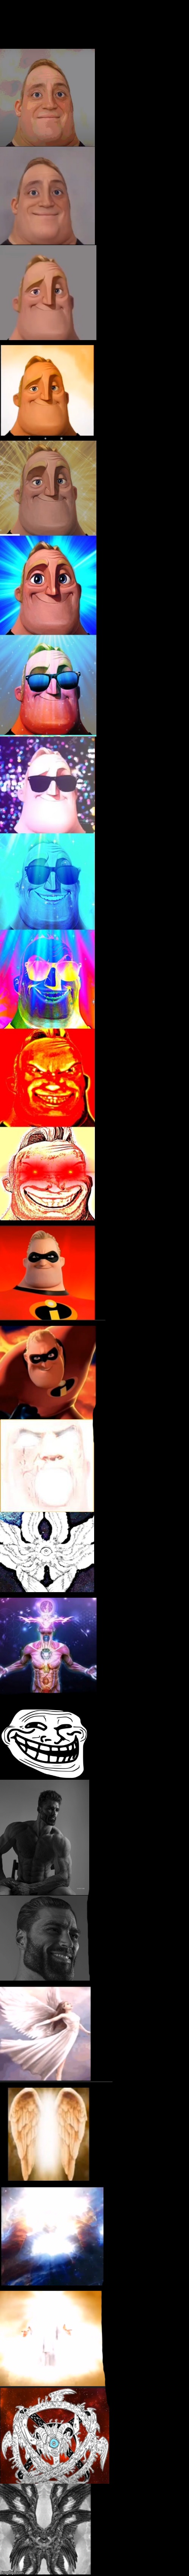 Mr. Incredible becoming canny Ultimately Extended version Blank Meme Template